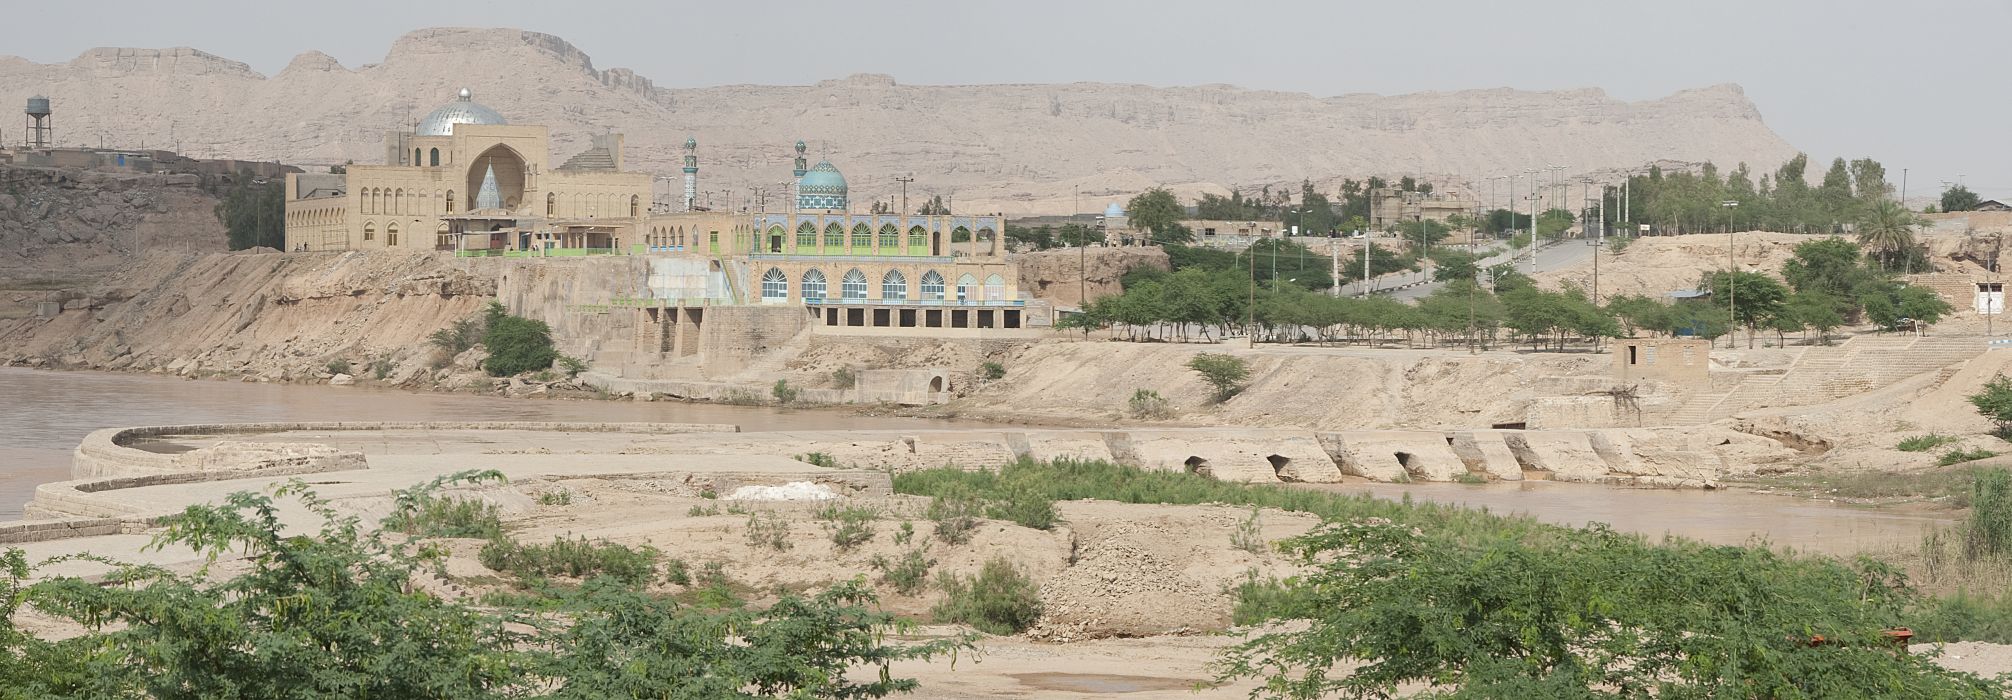 Band-i Mizan - View of dam from southwest.&nbsp;